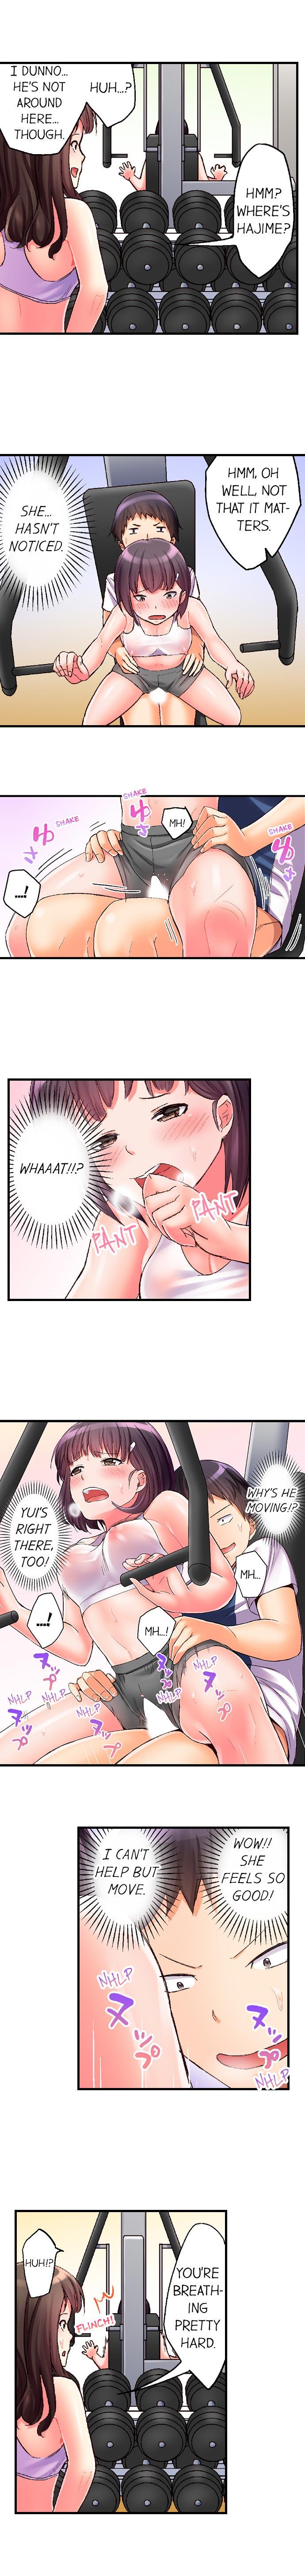 No Panty Booty Workout! Ch. 1 - 15 101